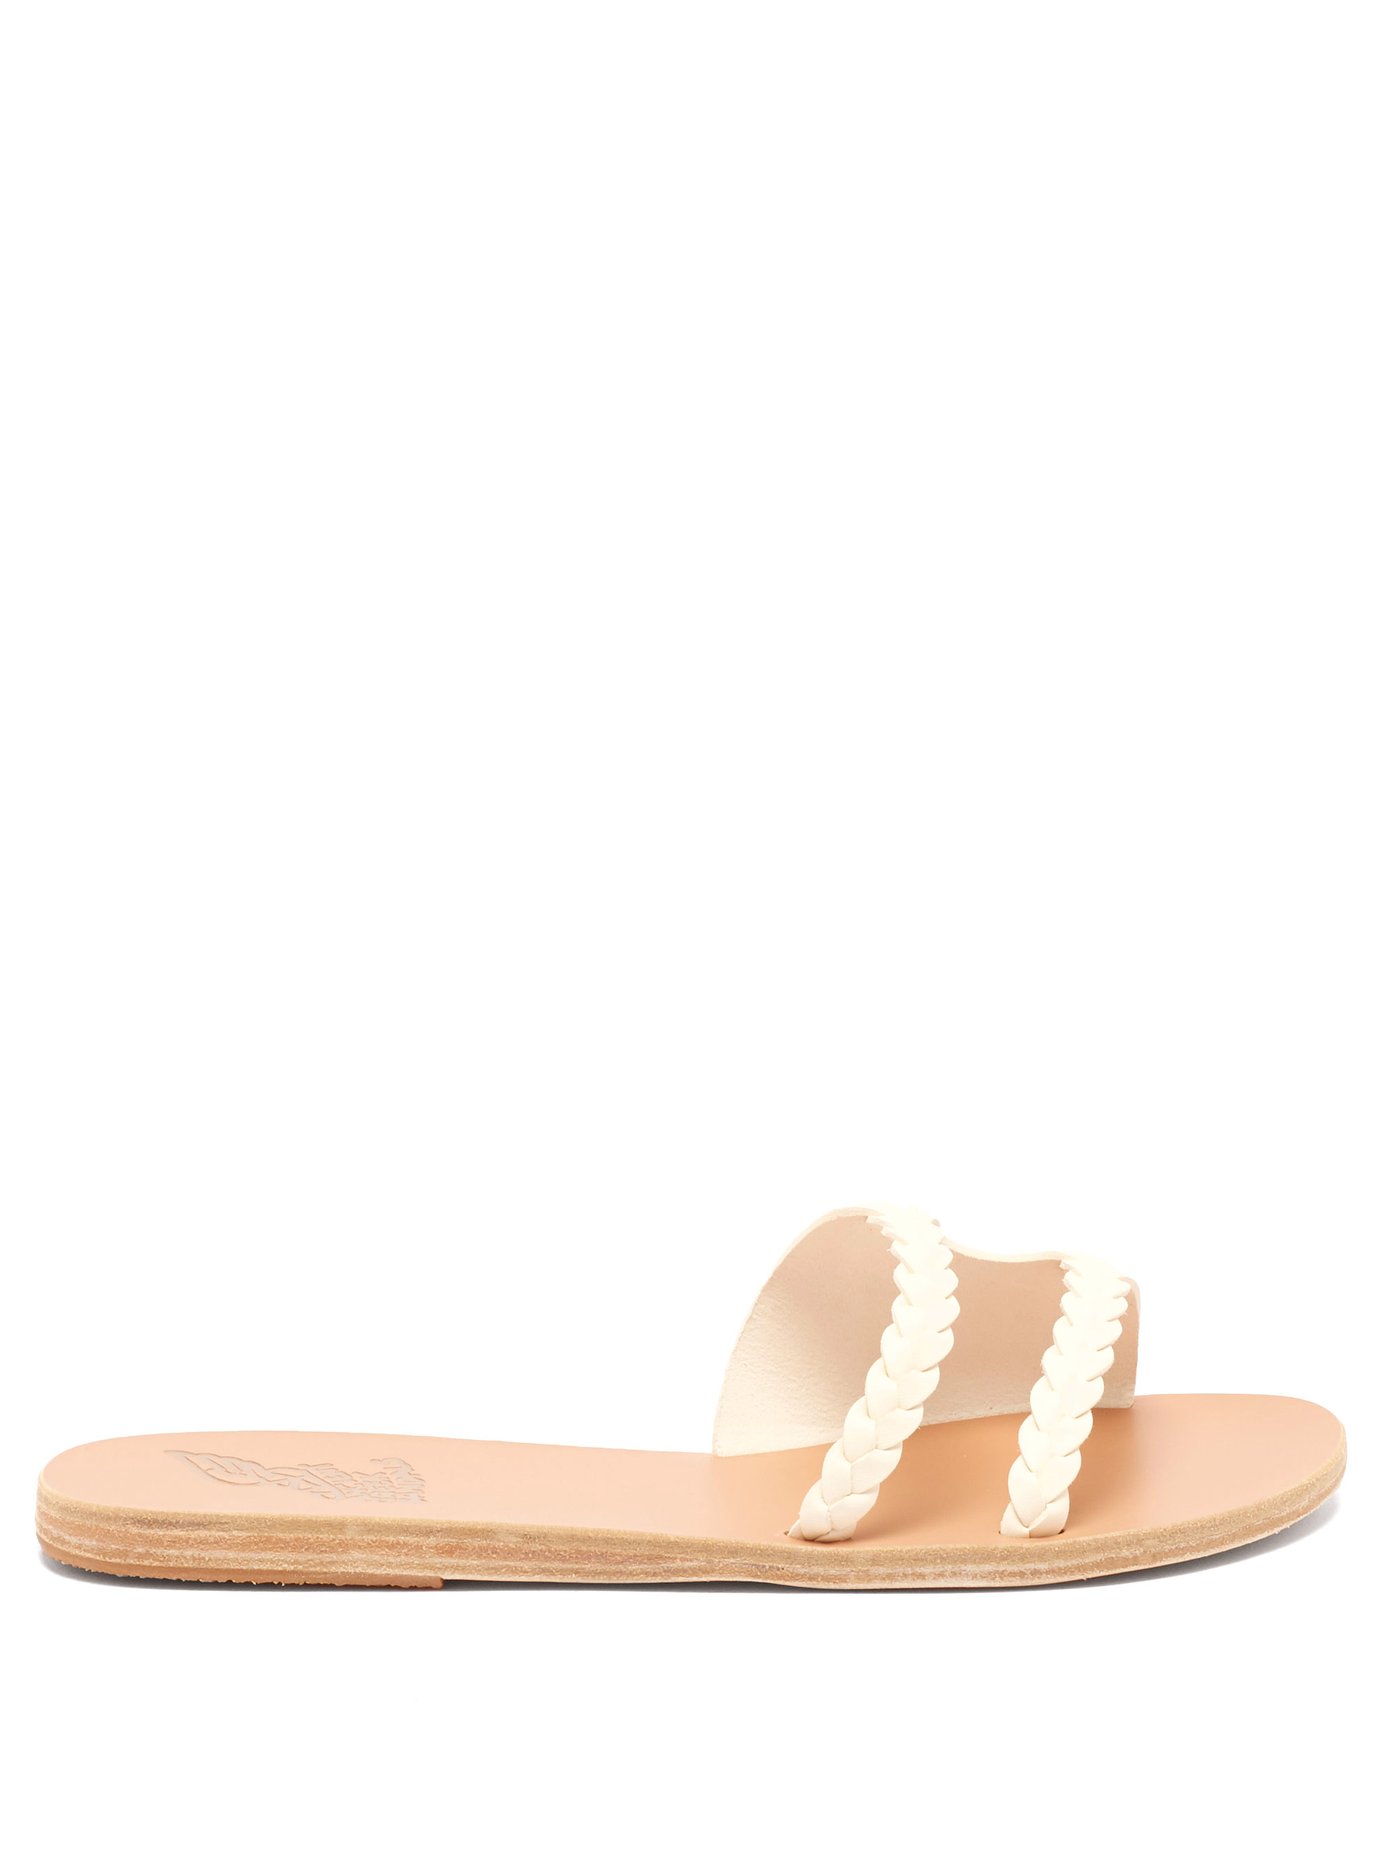 Ieria braided leather slides | Ancient 